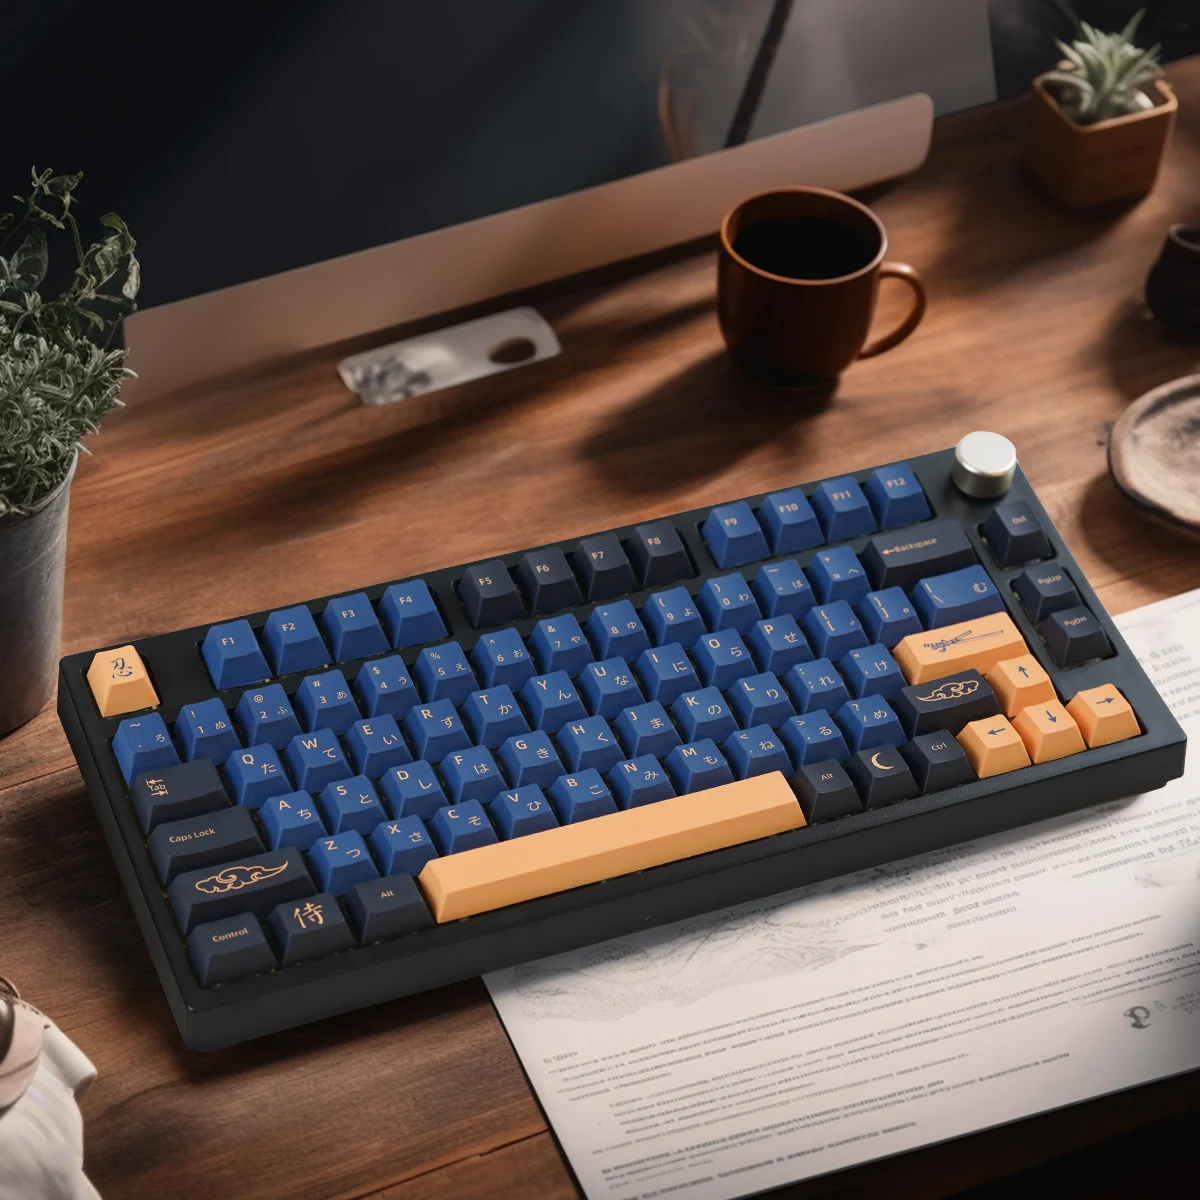 

MATHEW TECH MK80 Max Wireless Mechanical Gaming Keyboard with LIGHTSYNC RGB Lighting,Tactile Switches,PC and Mac Compatible